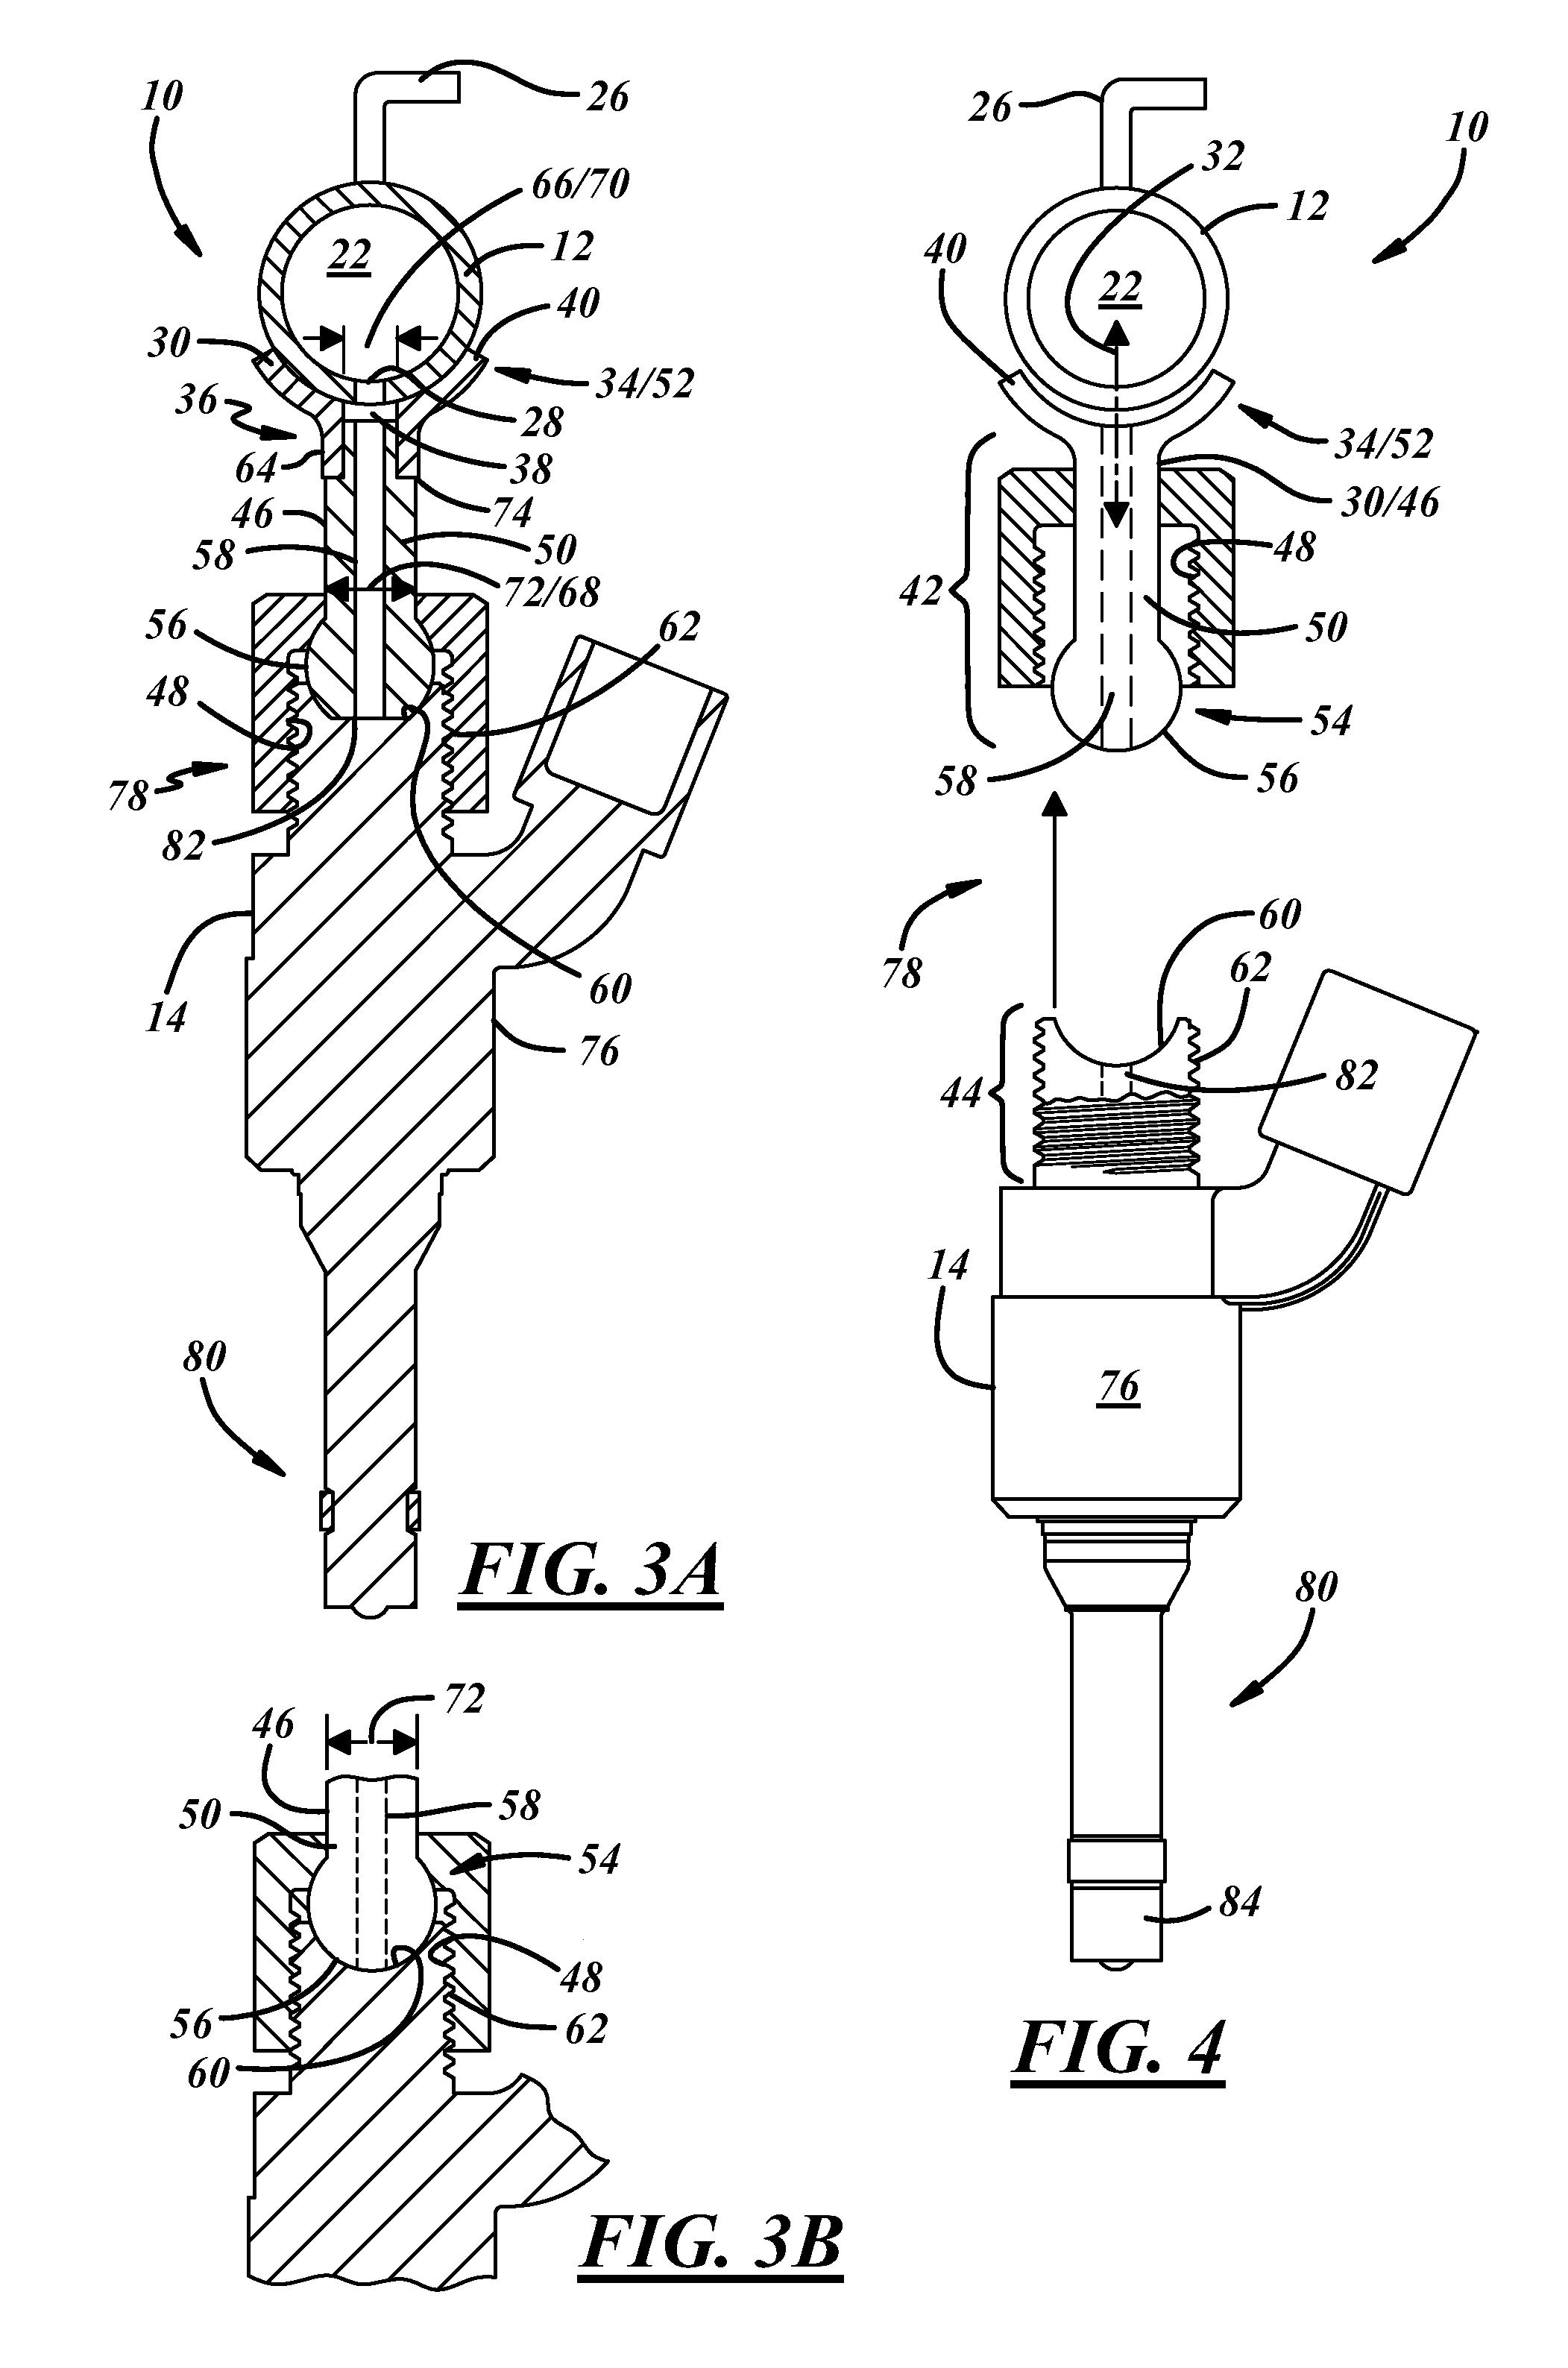 Attachment for fuel injectors in a fuel delivery system